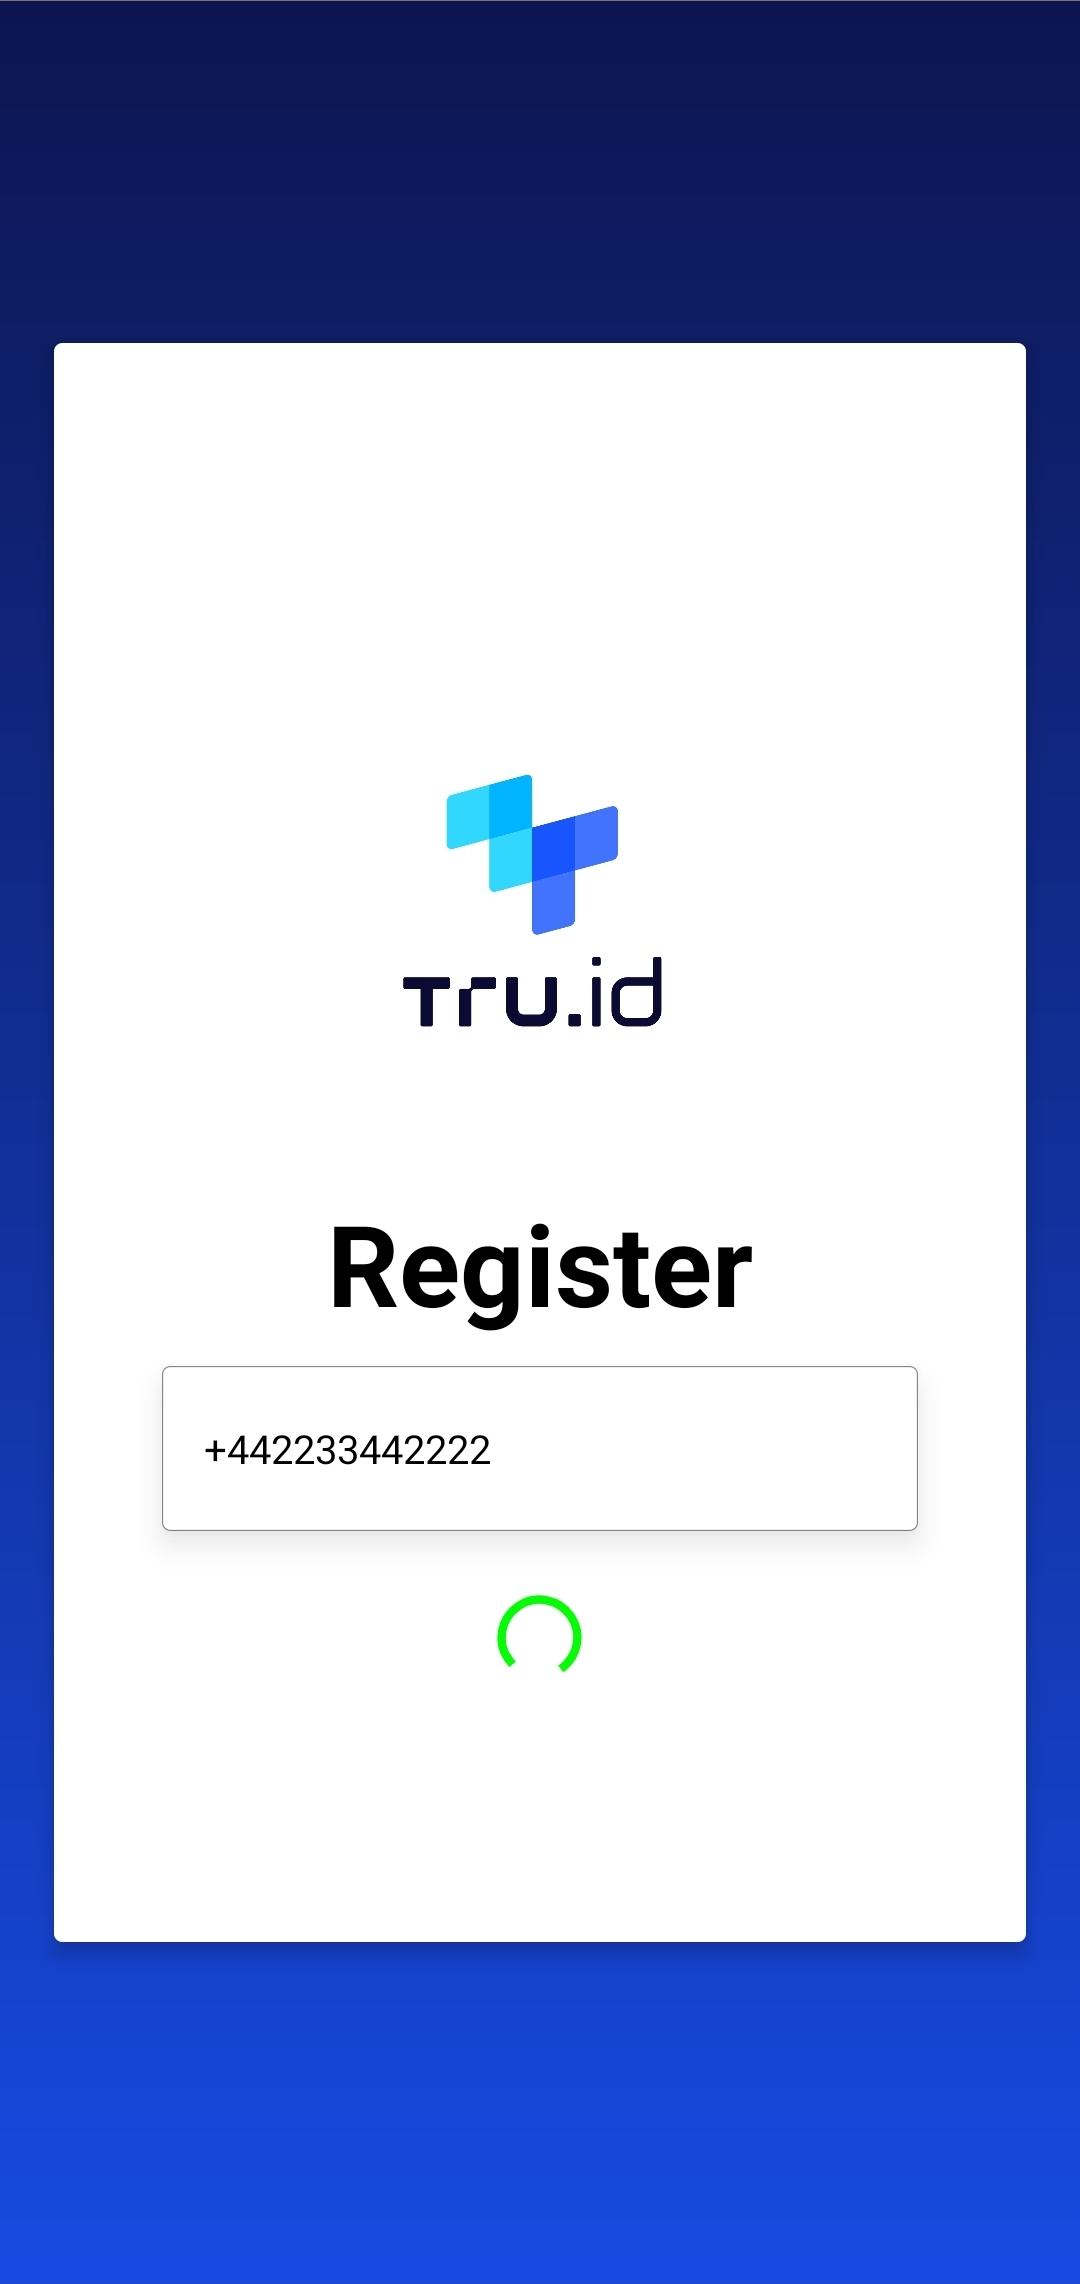 A tru.ID mobile app screen showing a blue background, smaller white box area with a tru.ID logo, a text box with a phone number, and a loading indicator.